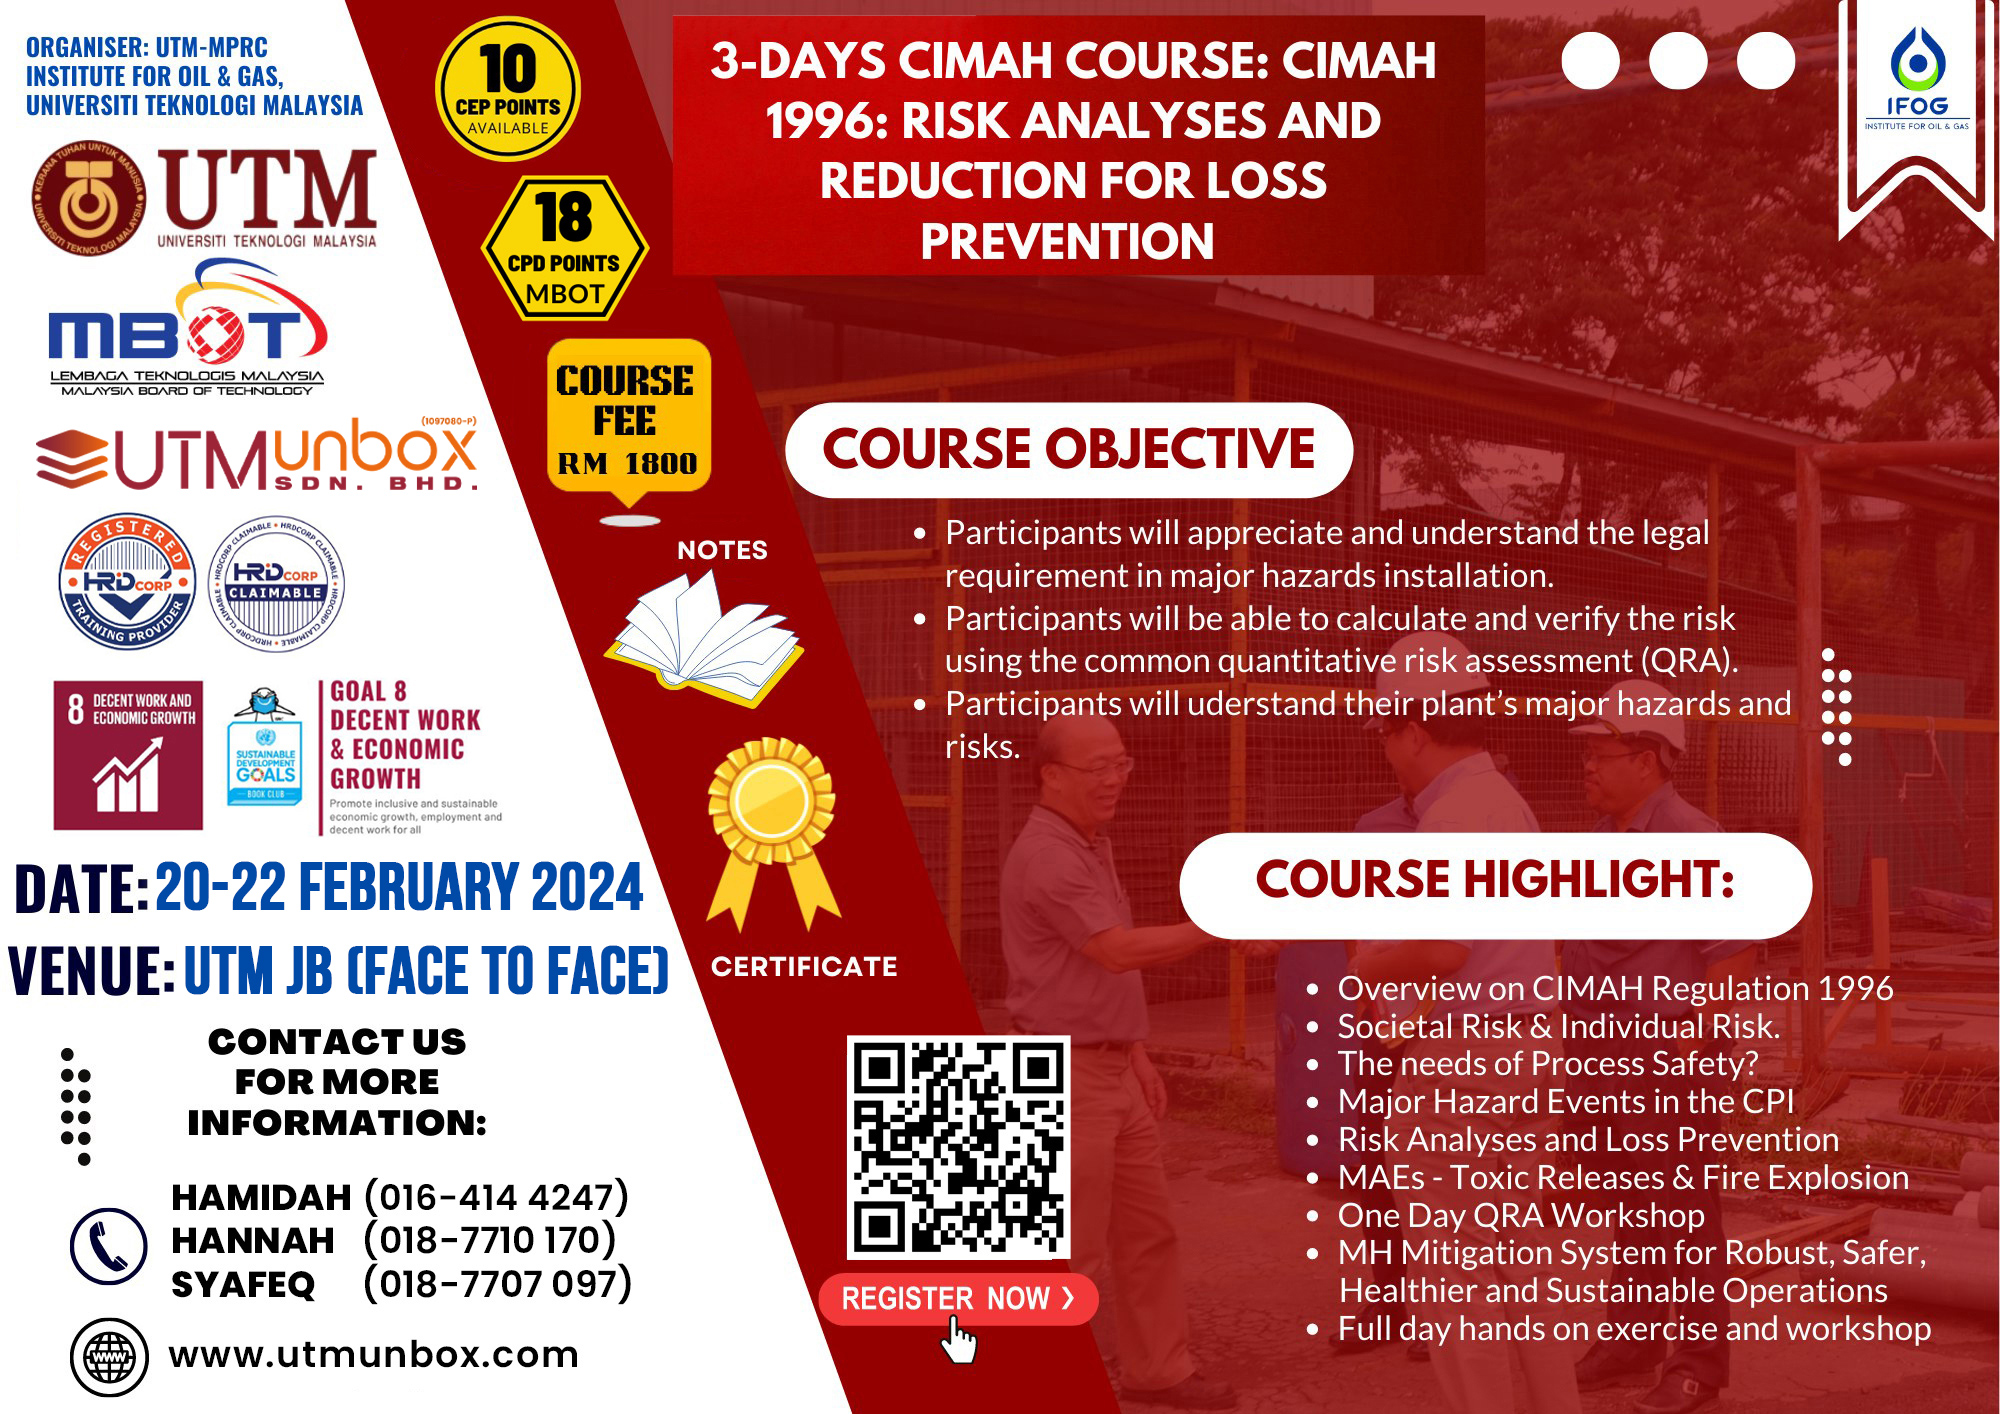 You are currently viewing CIMAH 1996: RISK ANALYSES AND REDUCTION IN LOSS PREVENTION